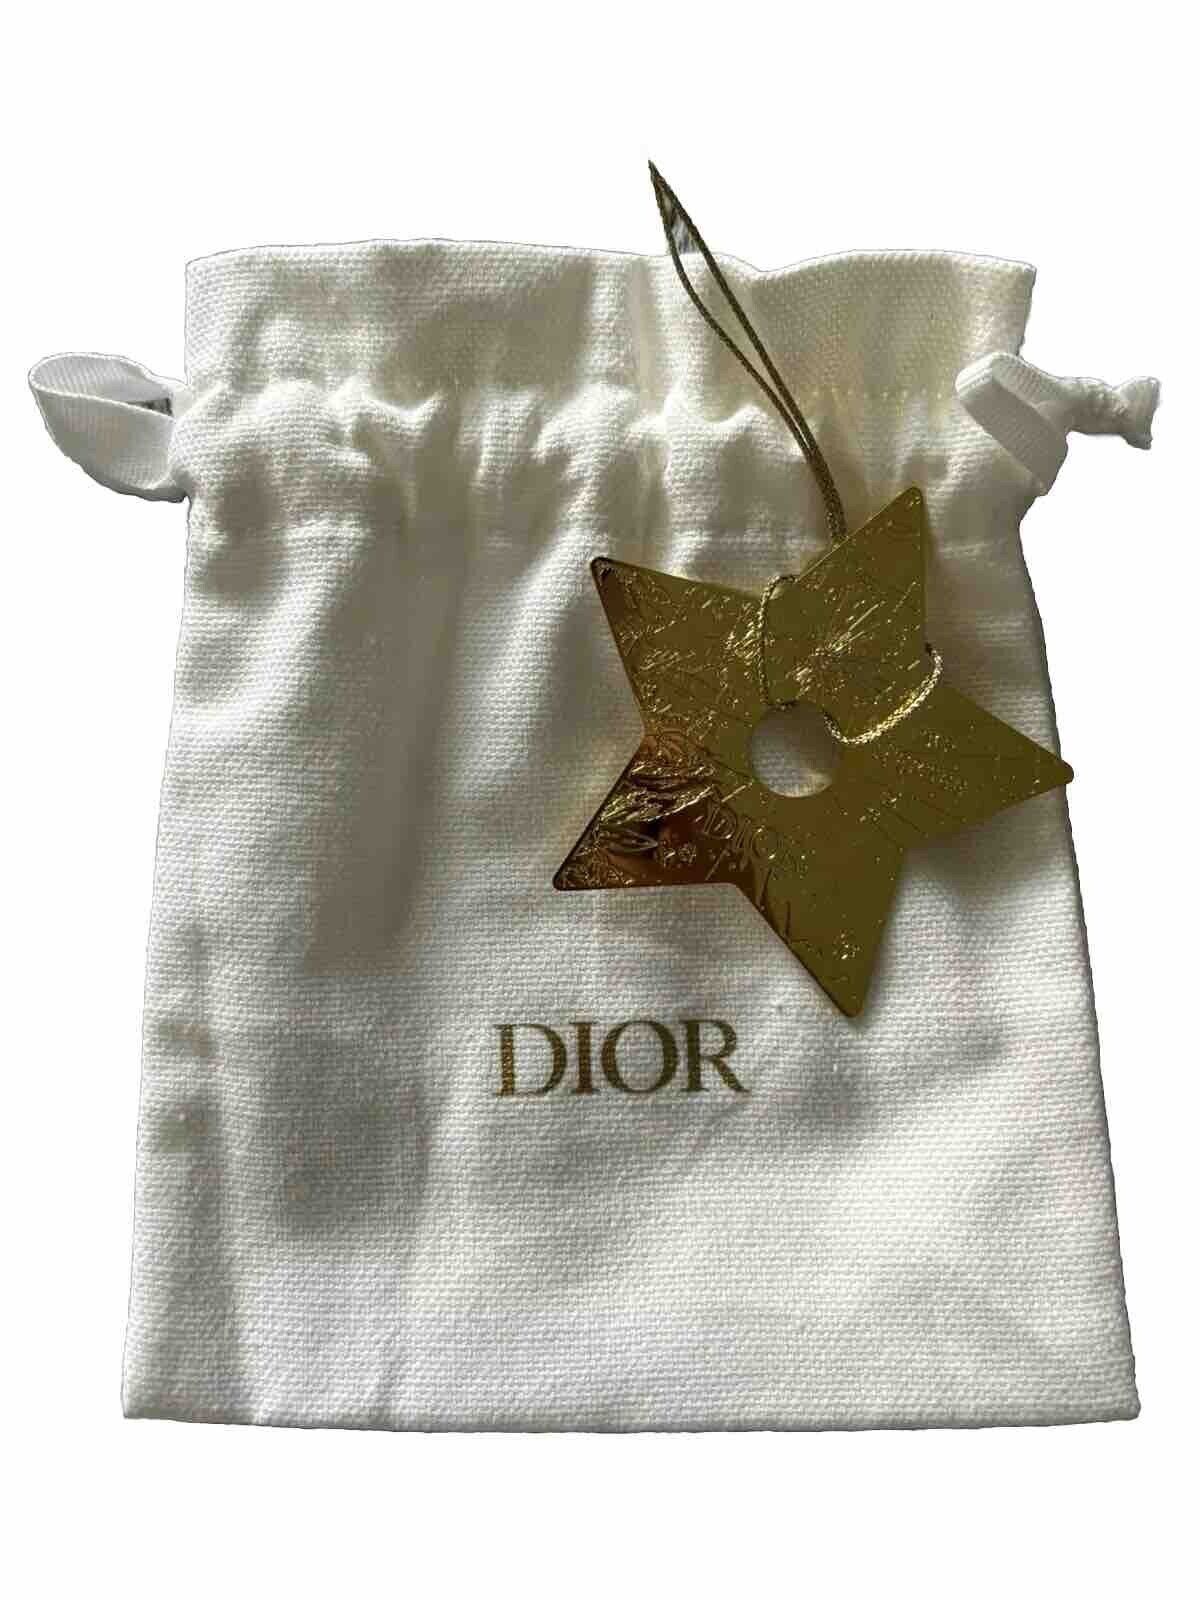 Dior Holiday Star Charm/Ornament -Comes with Pouch ⭐️